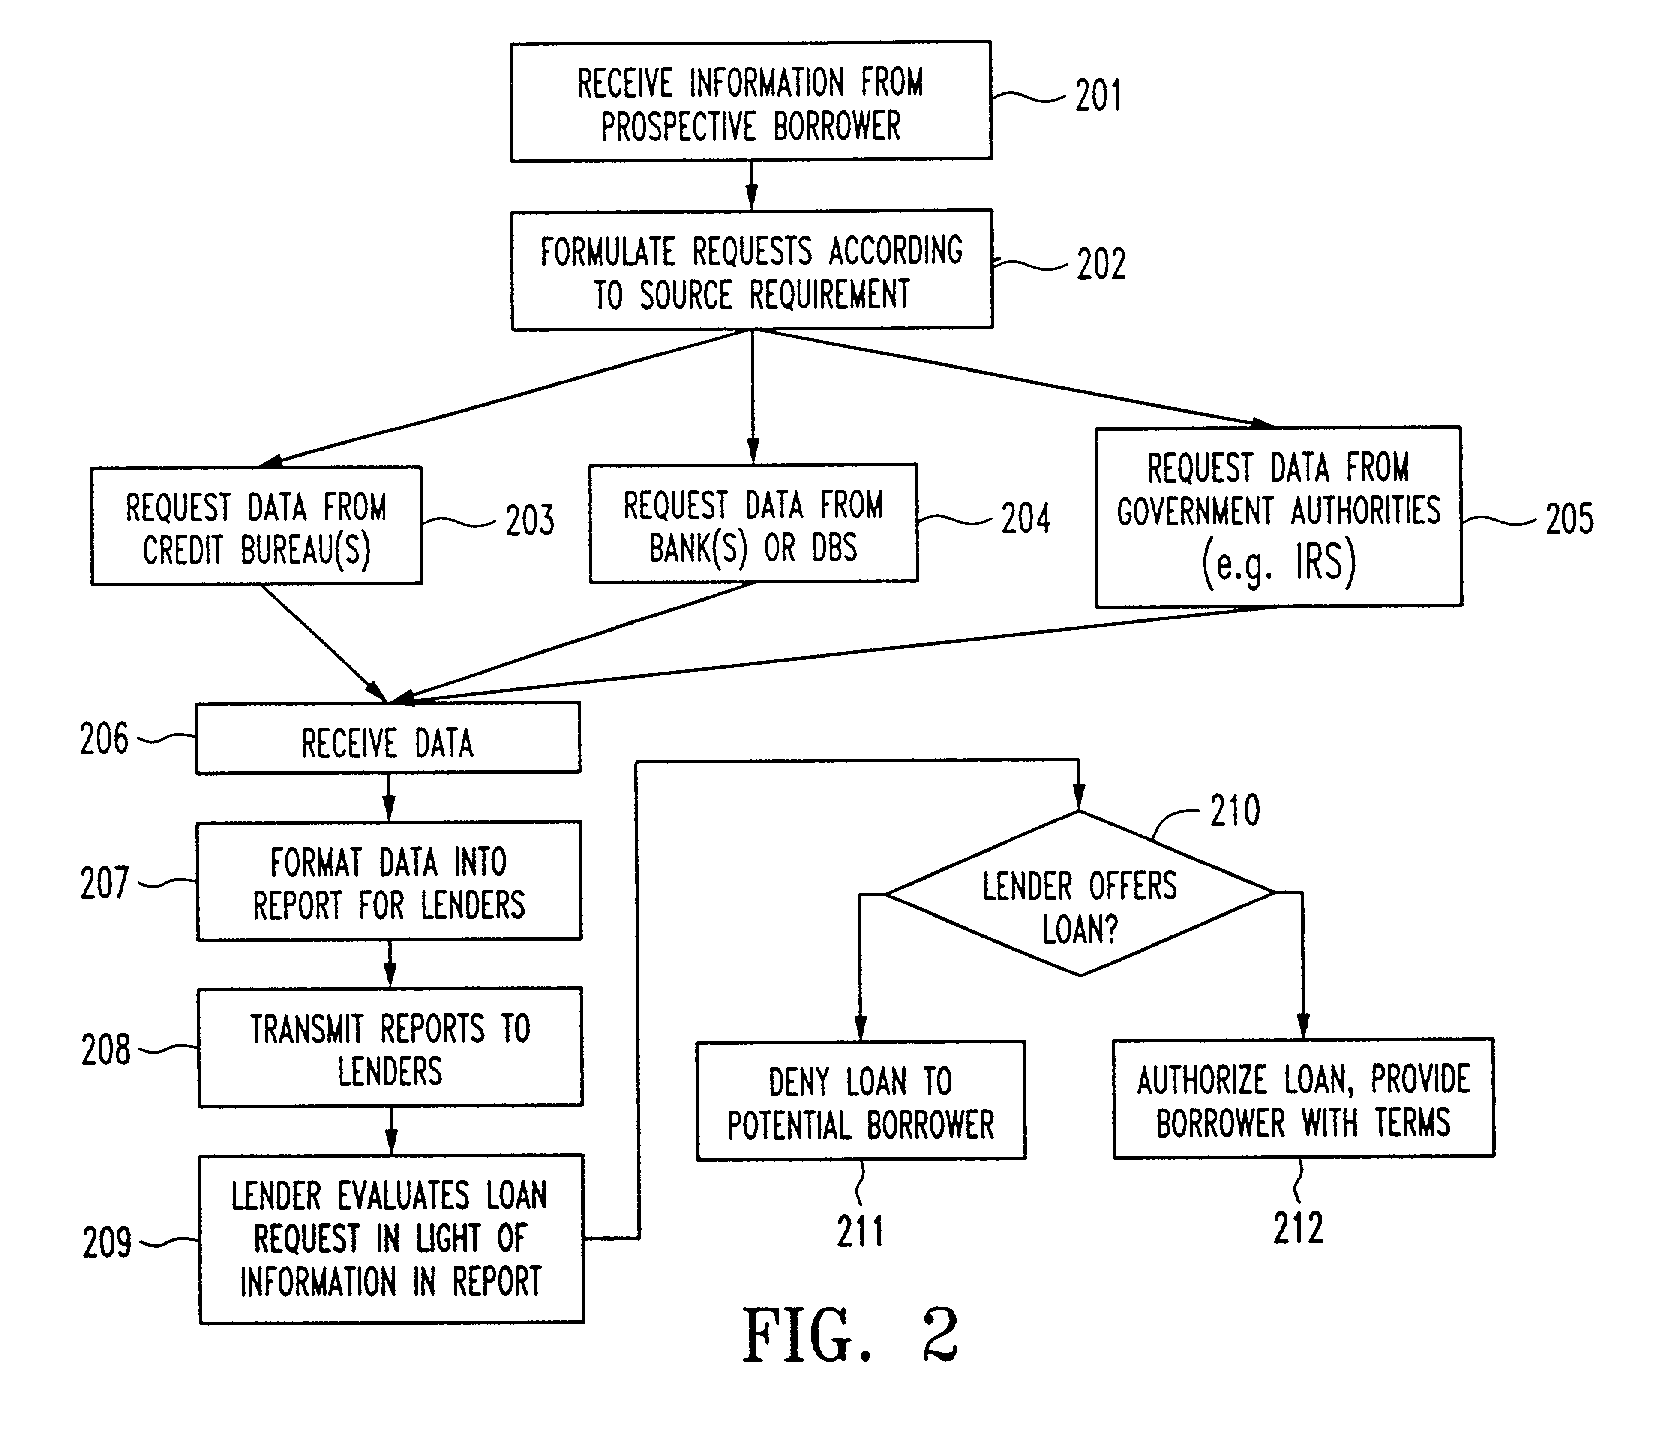 Systems and methods for electronically verifying and processing information